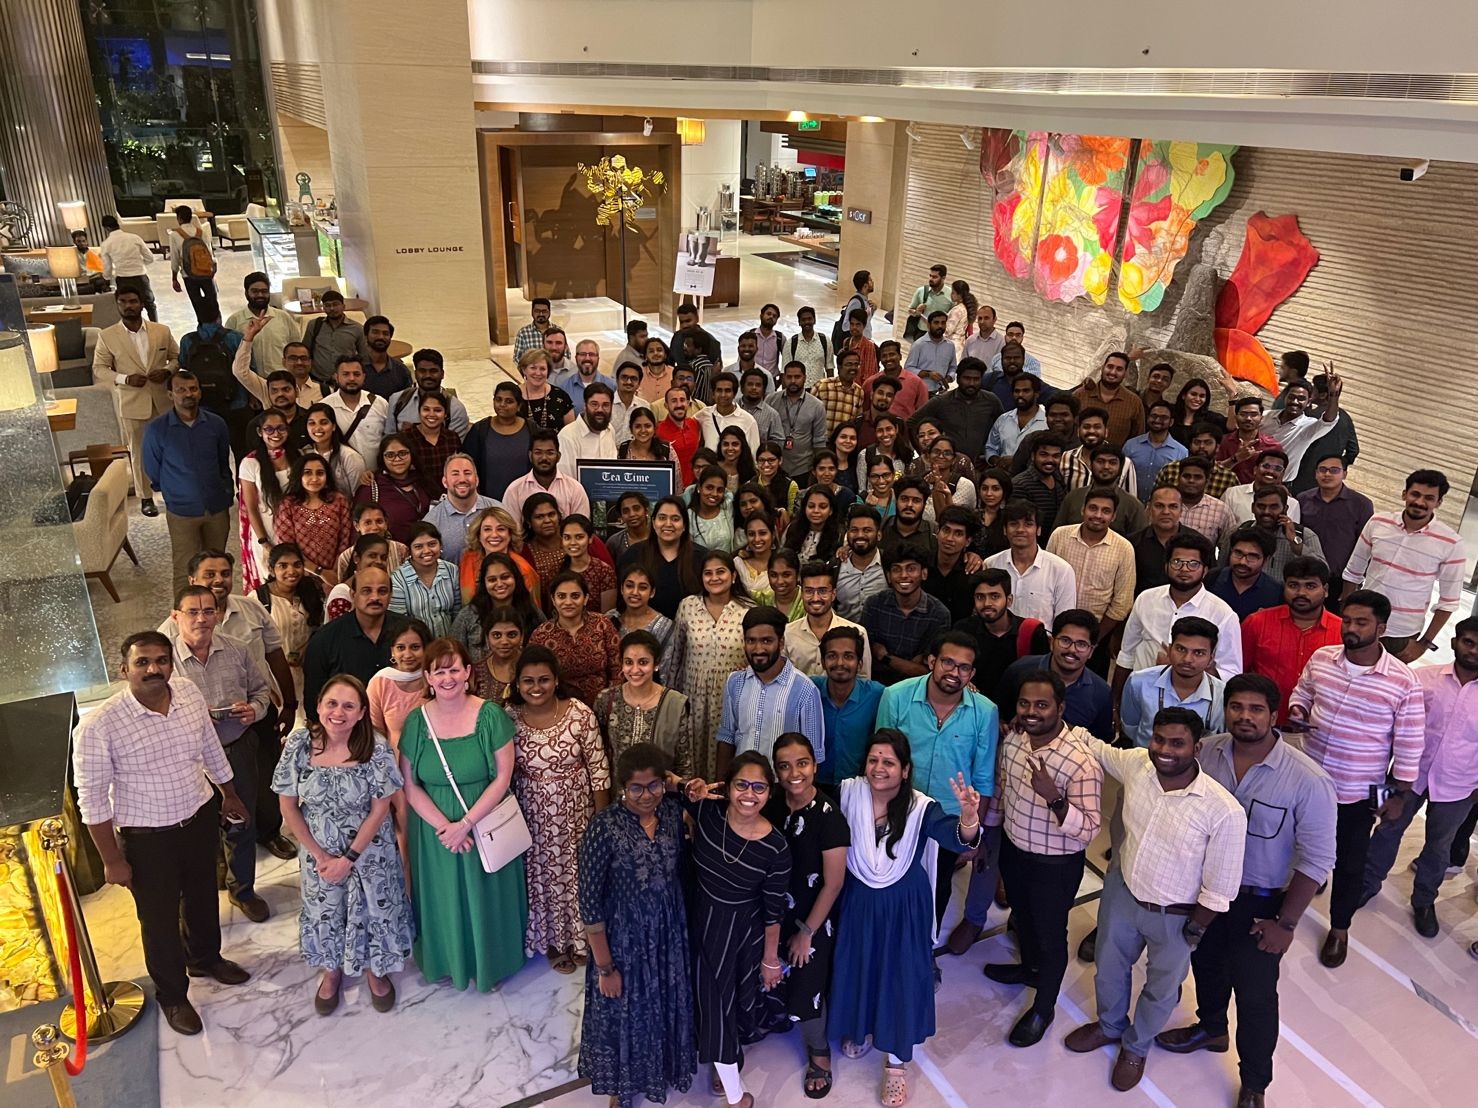 A visit to Chennai where we were able to connect, and building relationships with our Chennai team